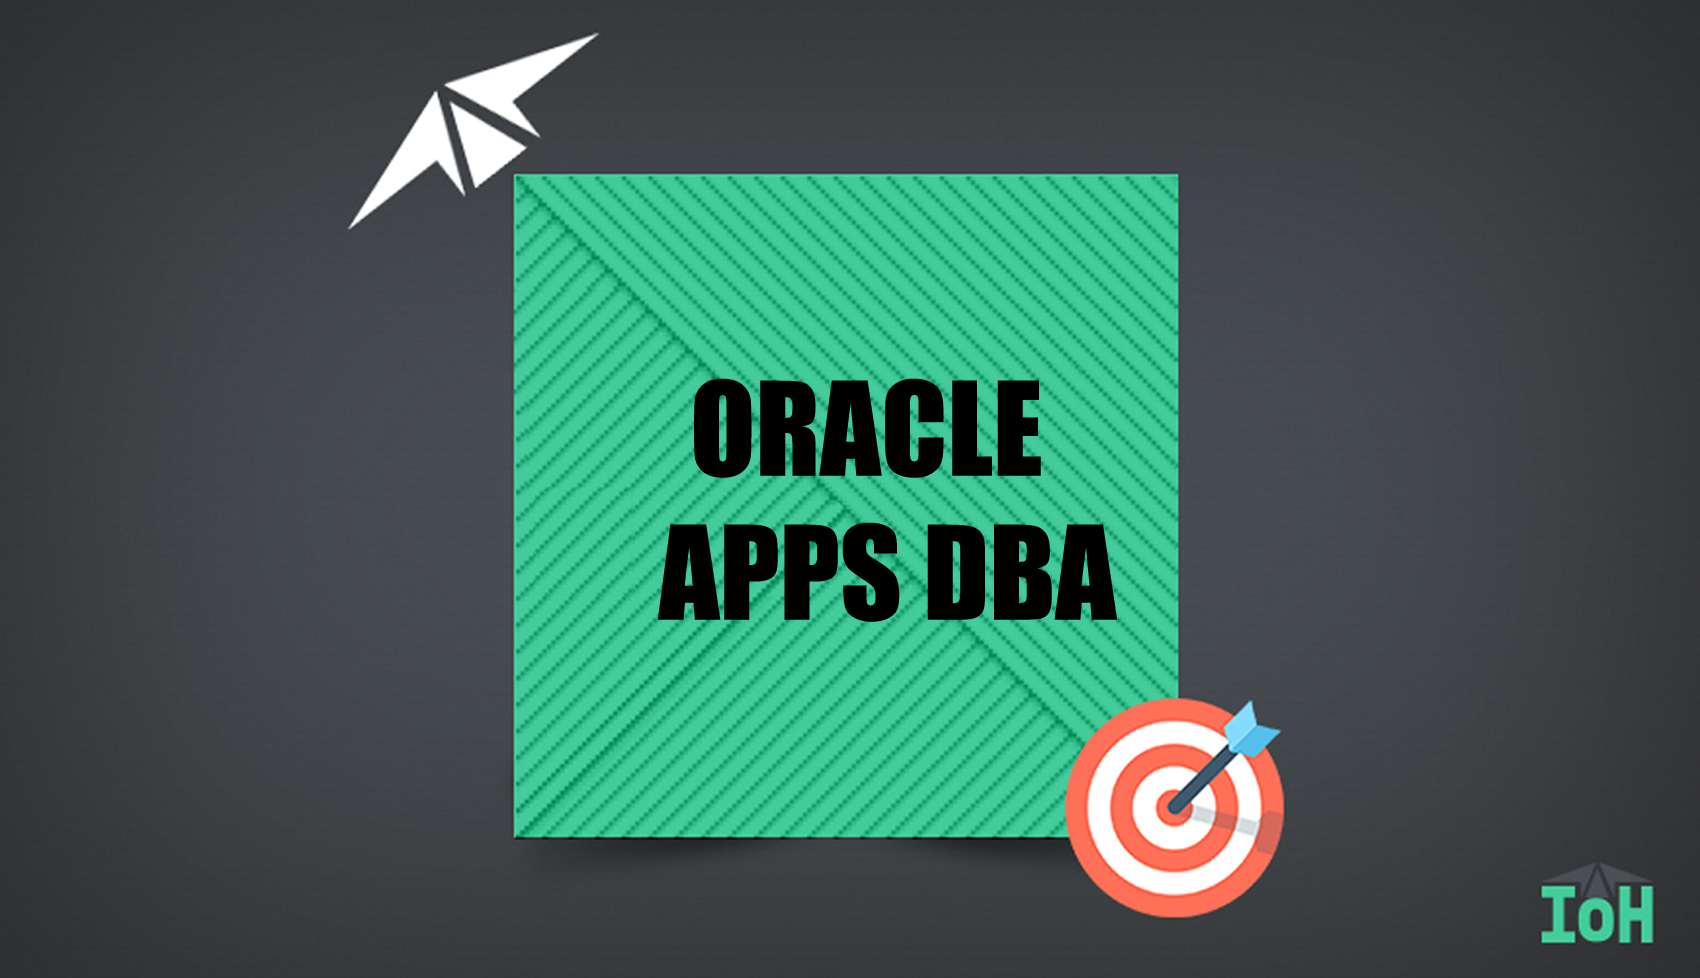 ORACLE APPS DBA